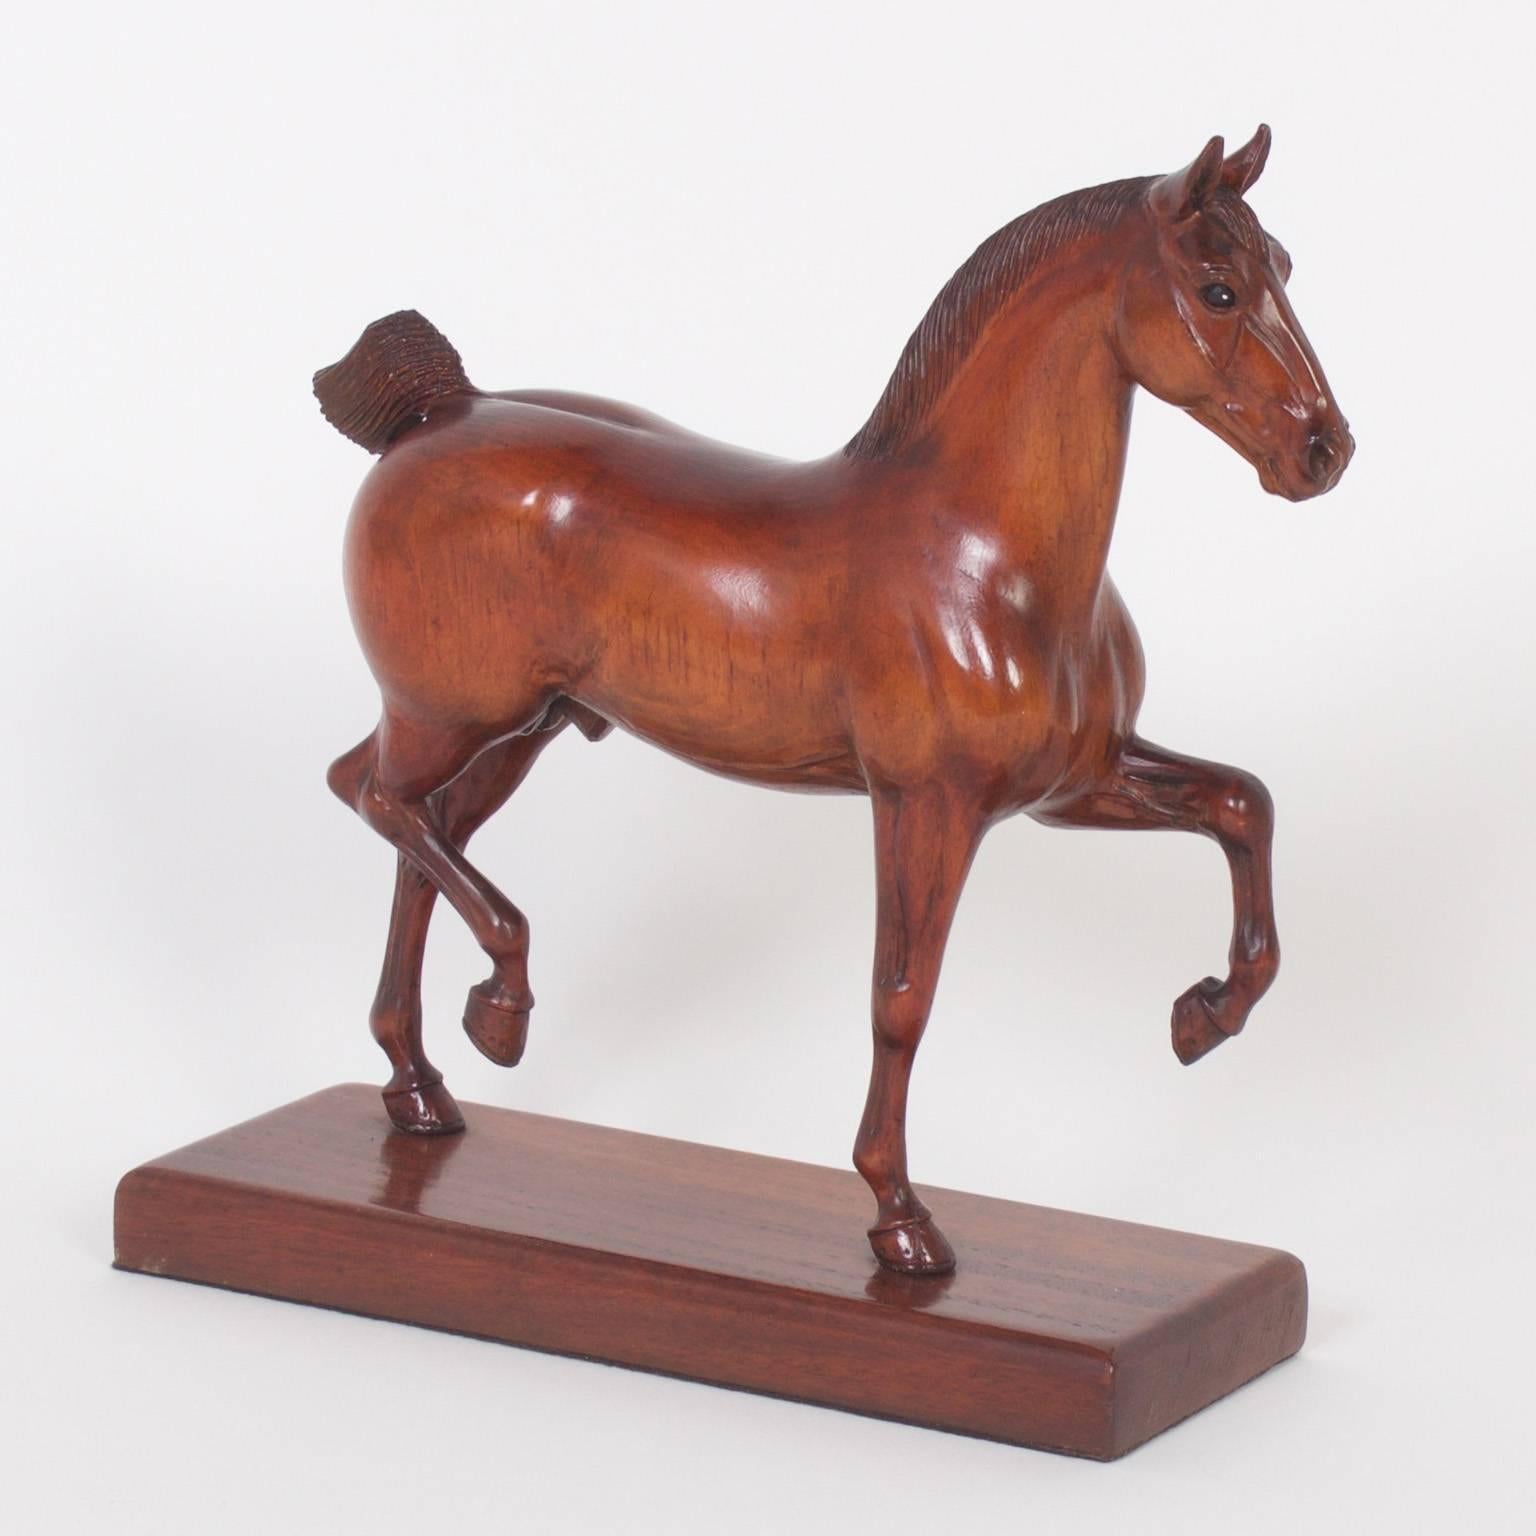 Spirited pair of carved mahogany show horse models in mid strut. These sculptures capture the essential power and elegance these majestic animals hold. 3709 C signed P. Giba on the base. Price for this horse is $2,350. Priced individually.
 